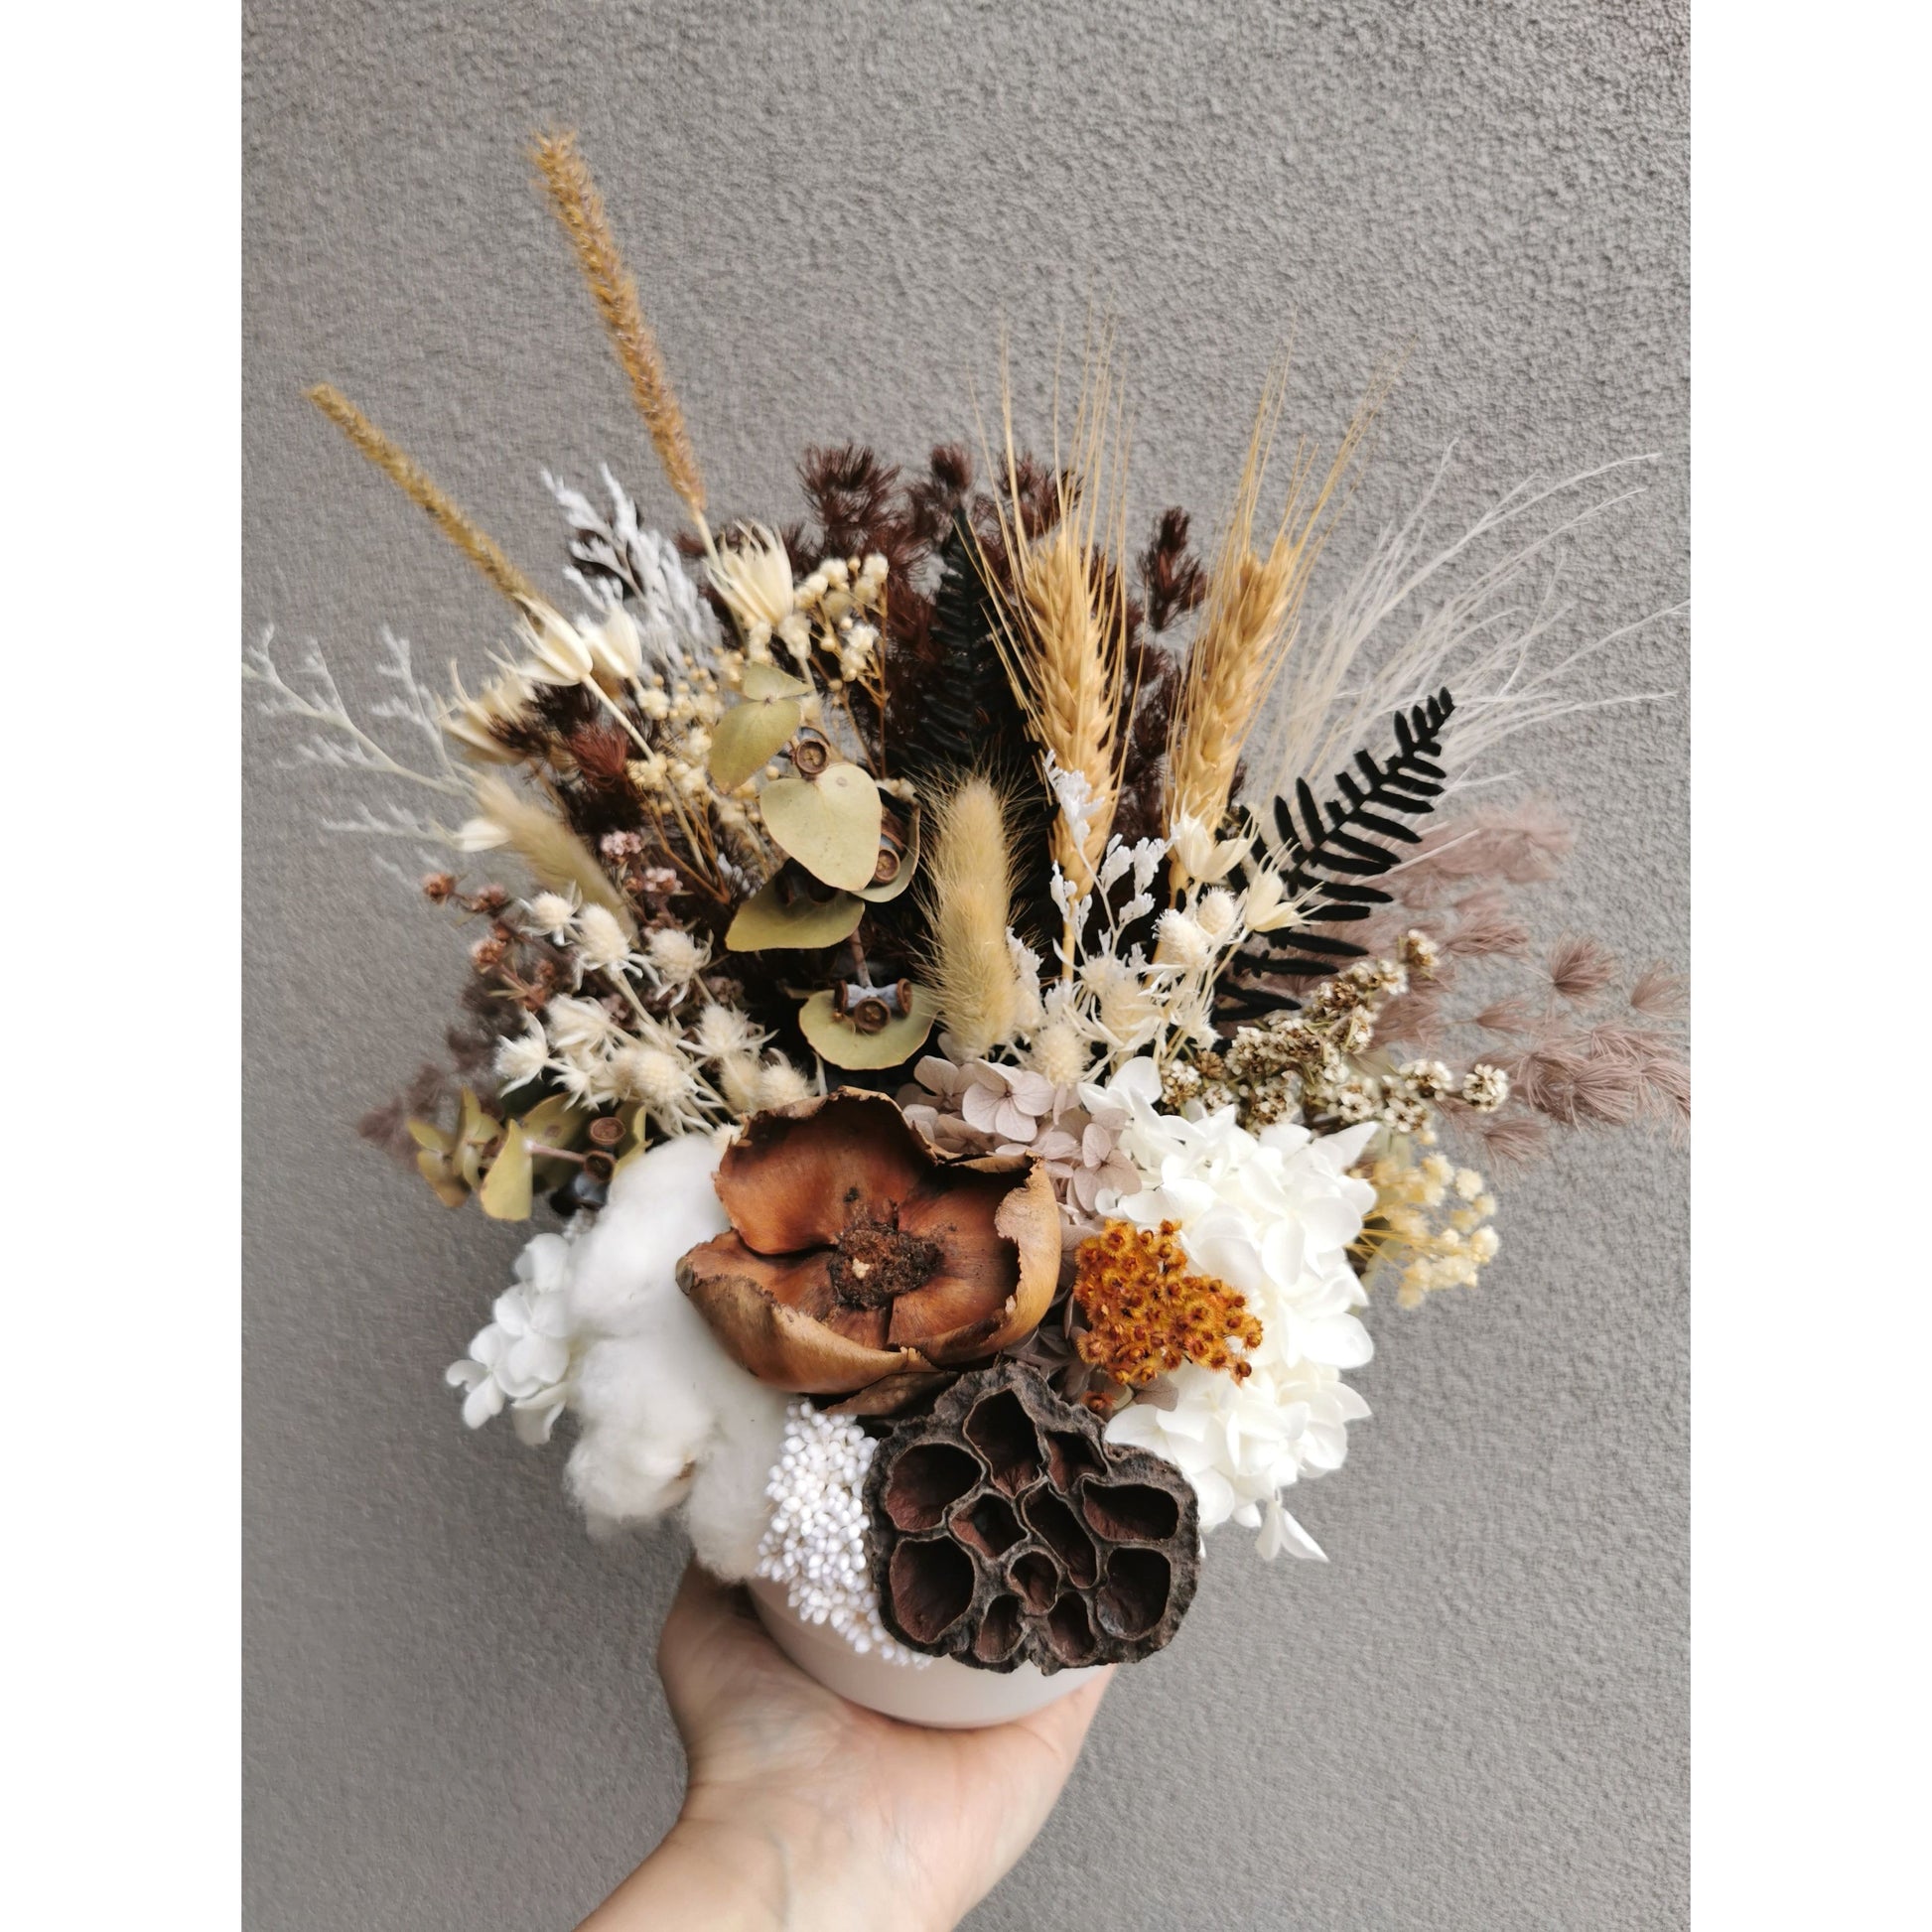 Dried & Preserved native flower arrangement in white pot. Picture shows flower arrangement being held up by hand against a blank wall and held at an angle